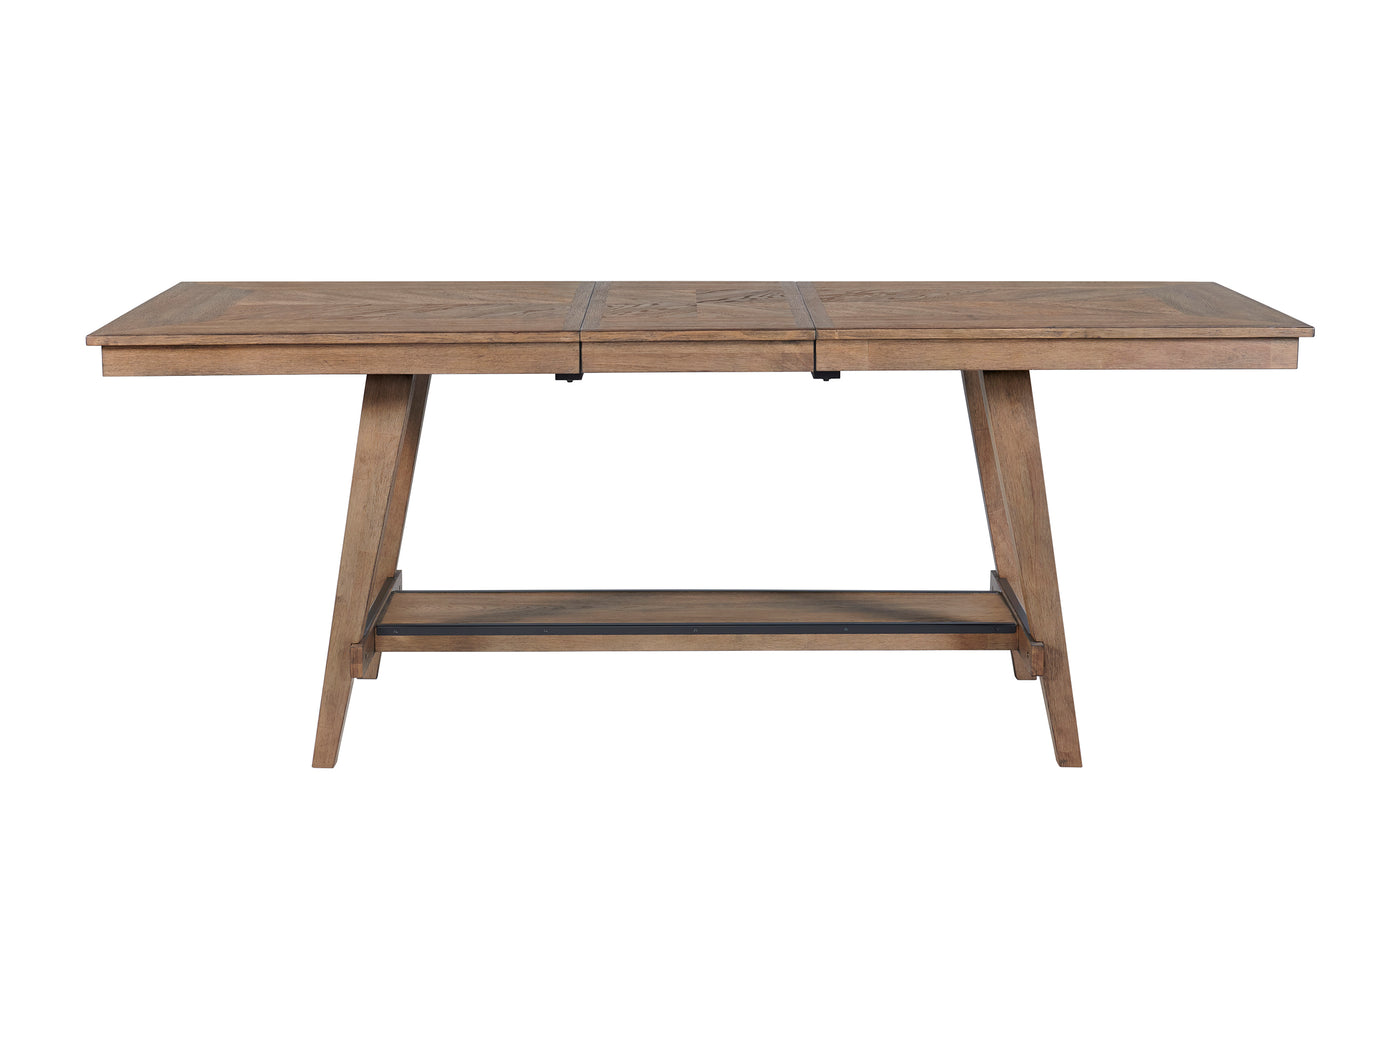 Oslo Extendable Counter Height Dining Table - Weathered Chestnut